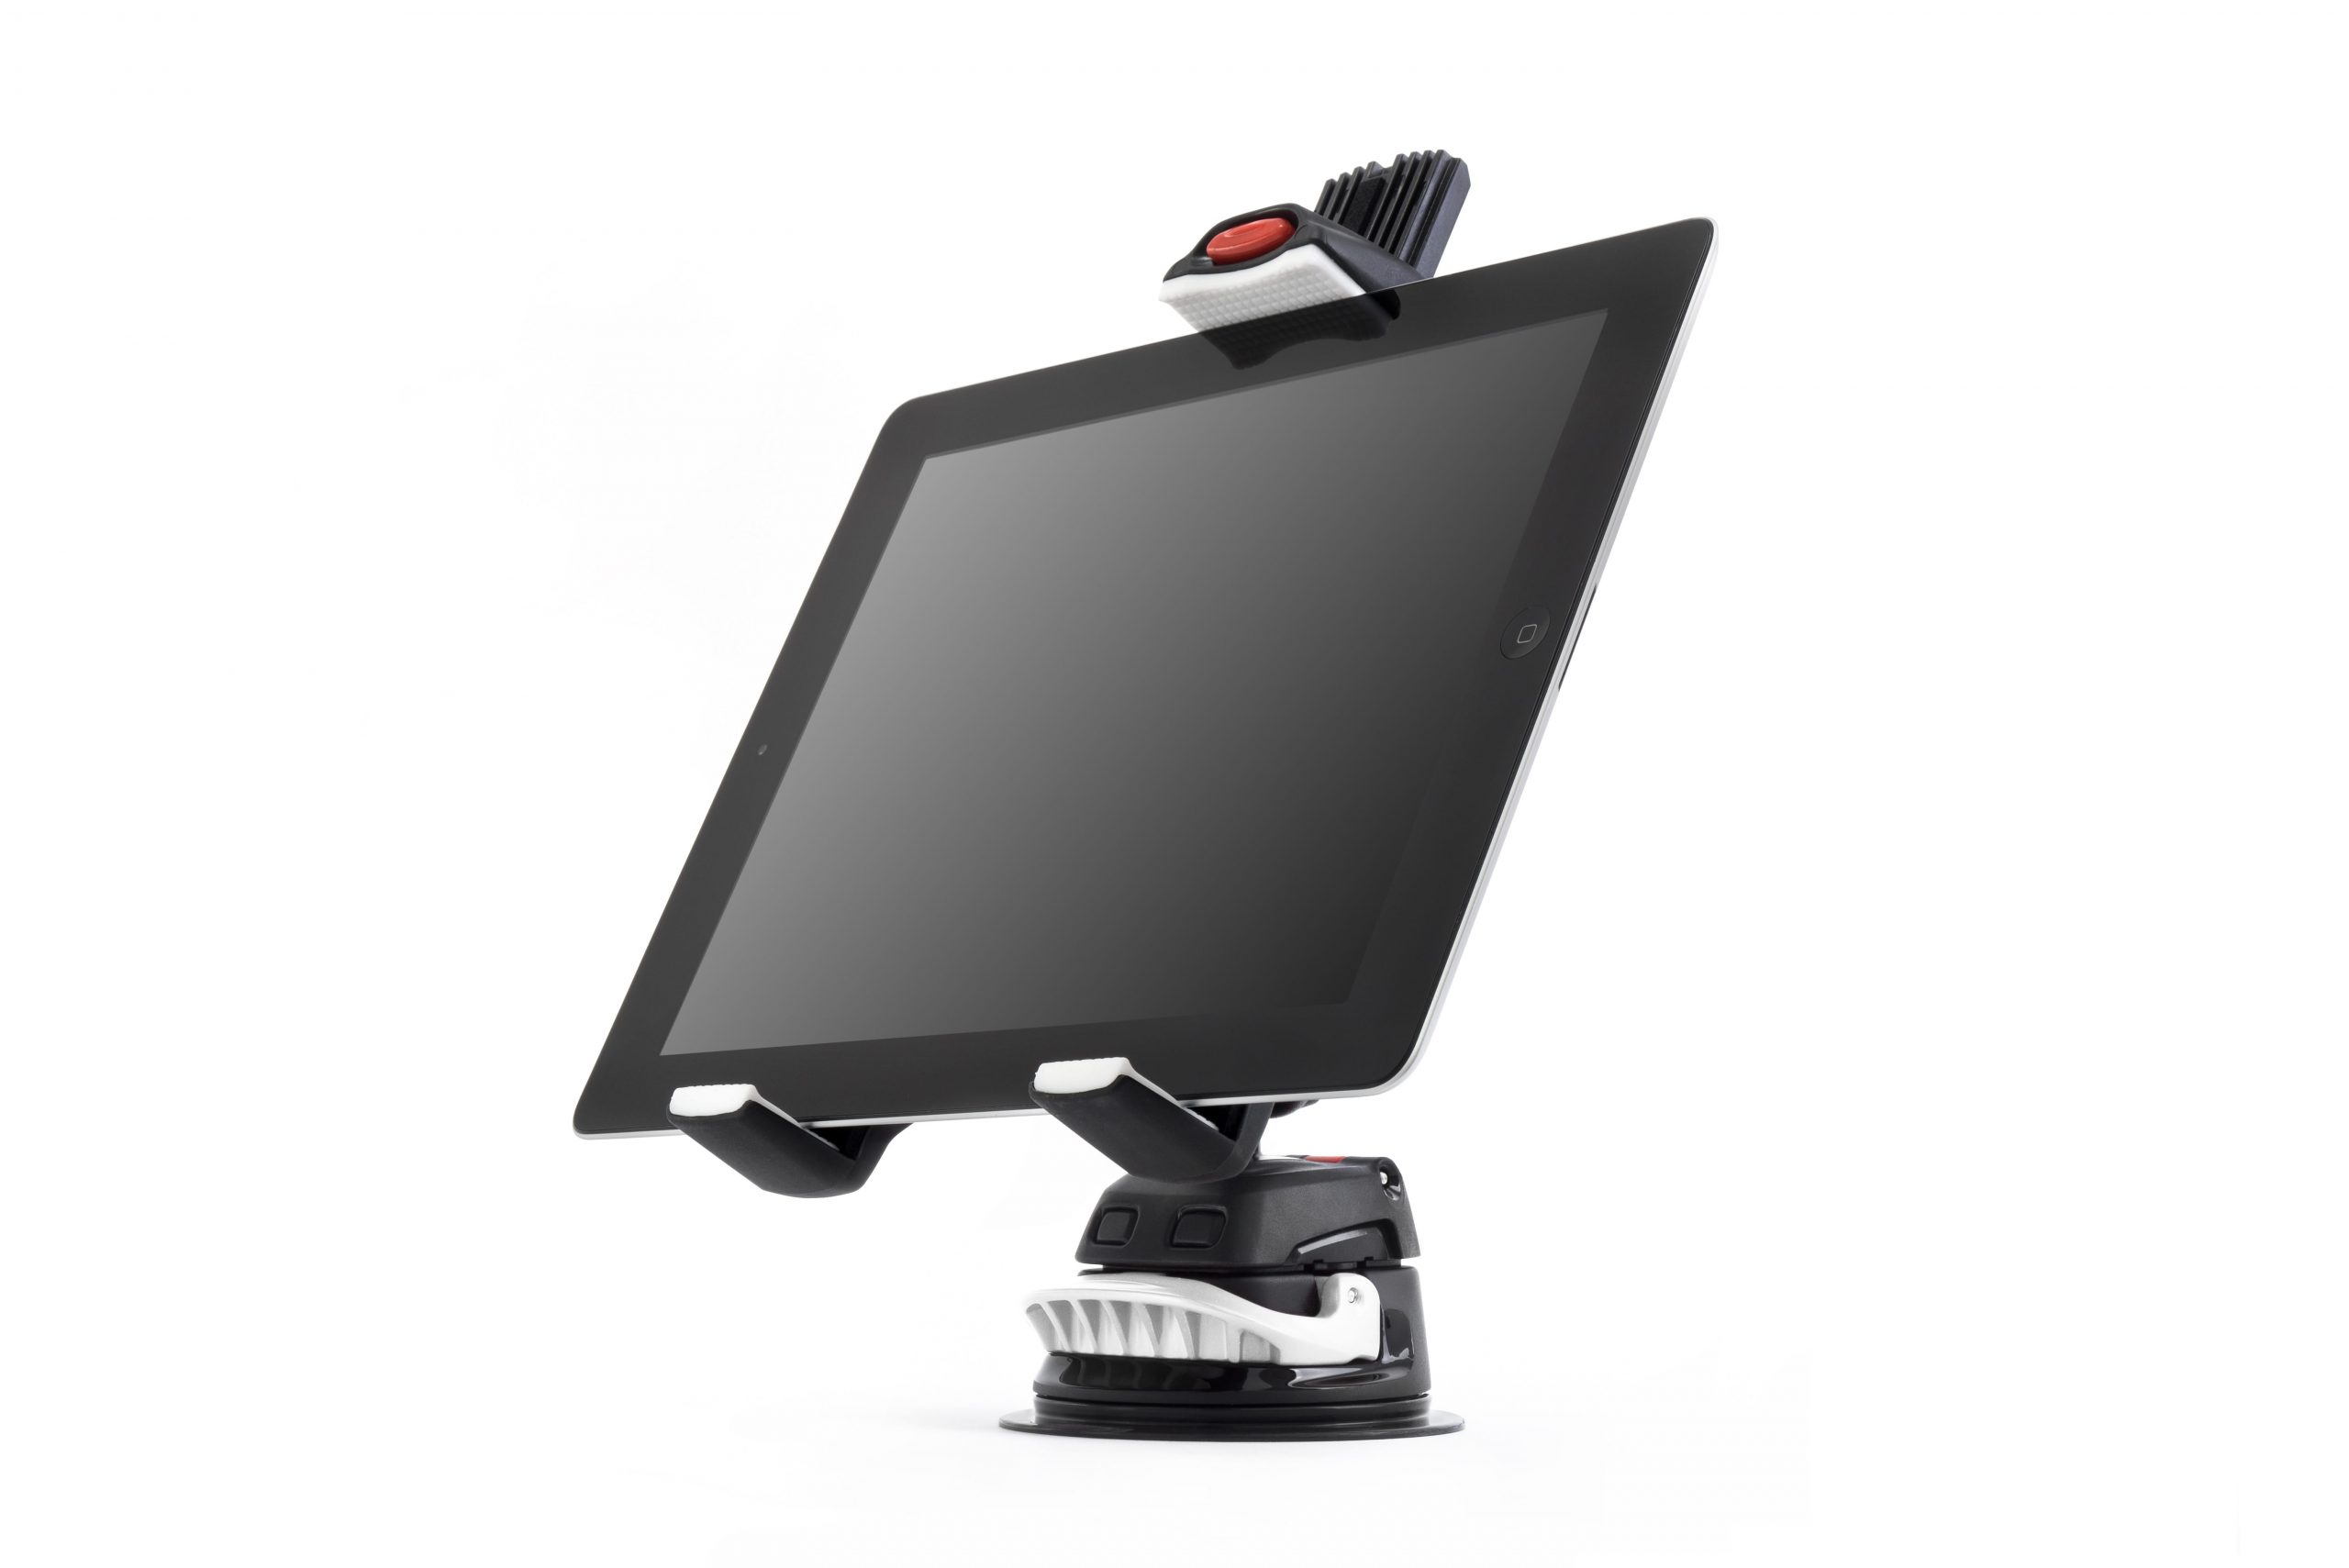 drum-tec holder for tablets, iPad & Android